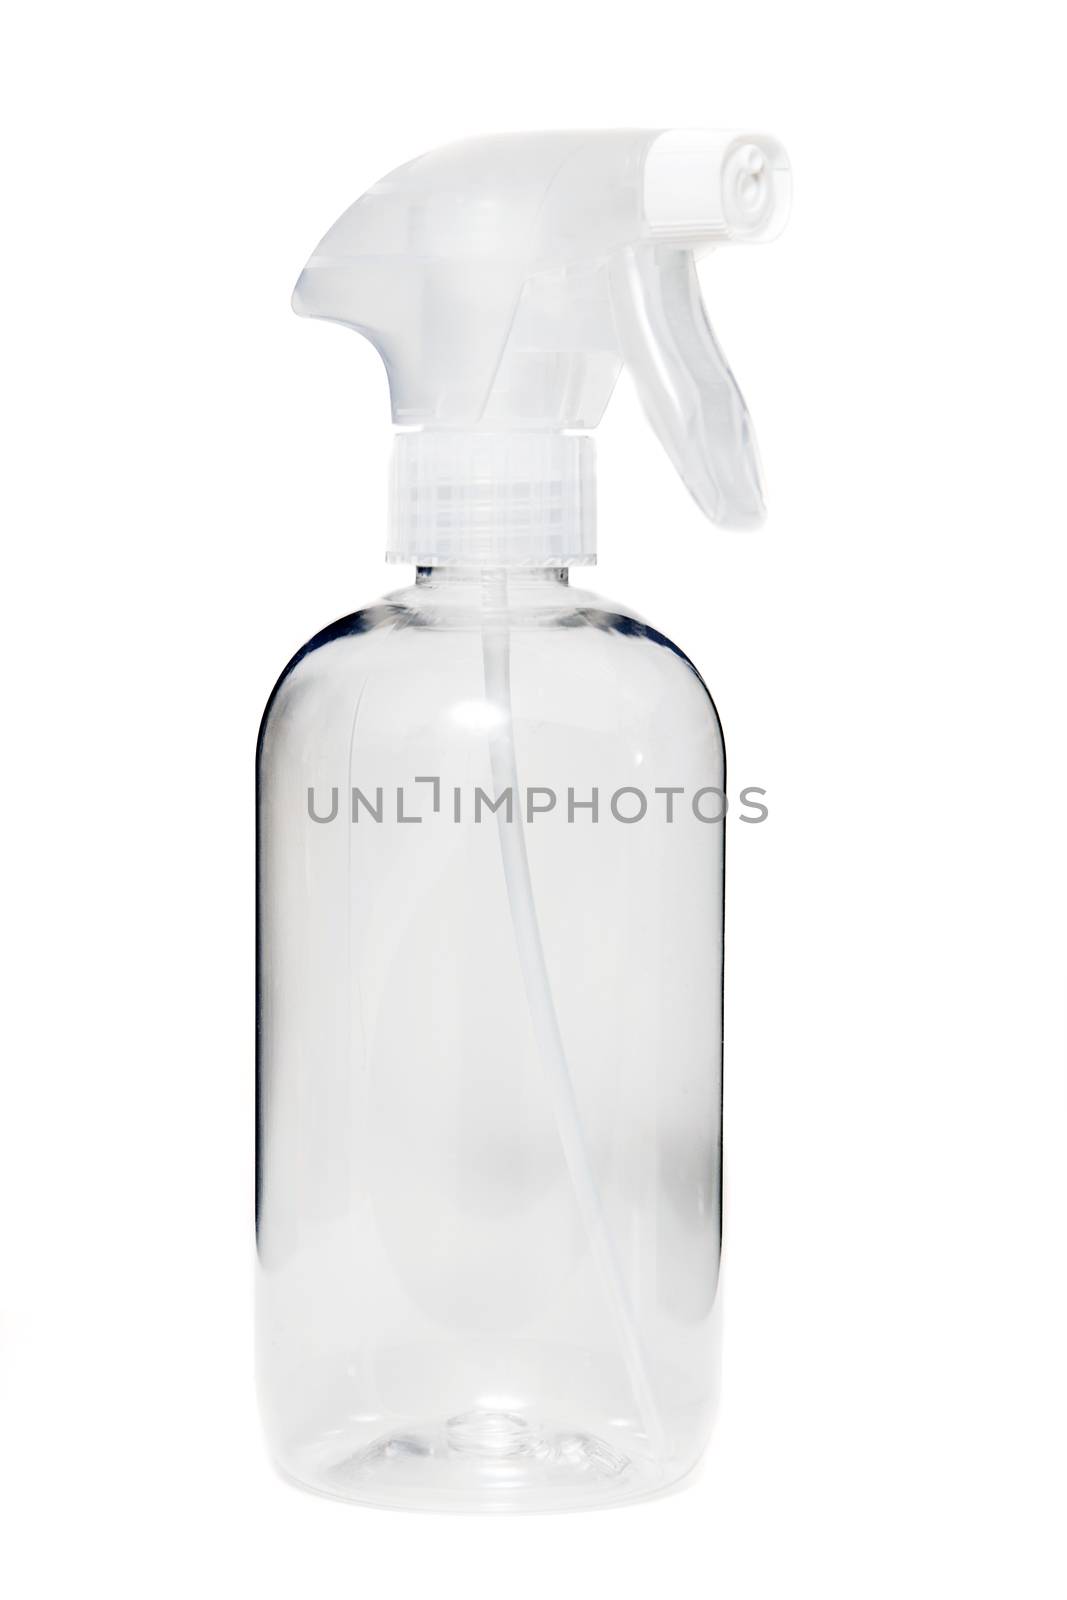 plastic detergent container isolated on a white background.